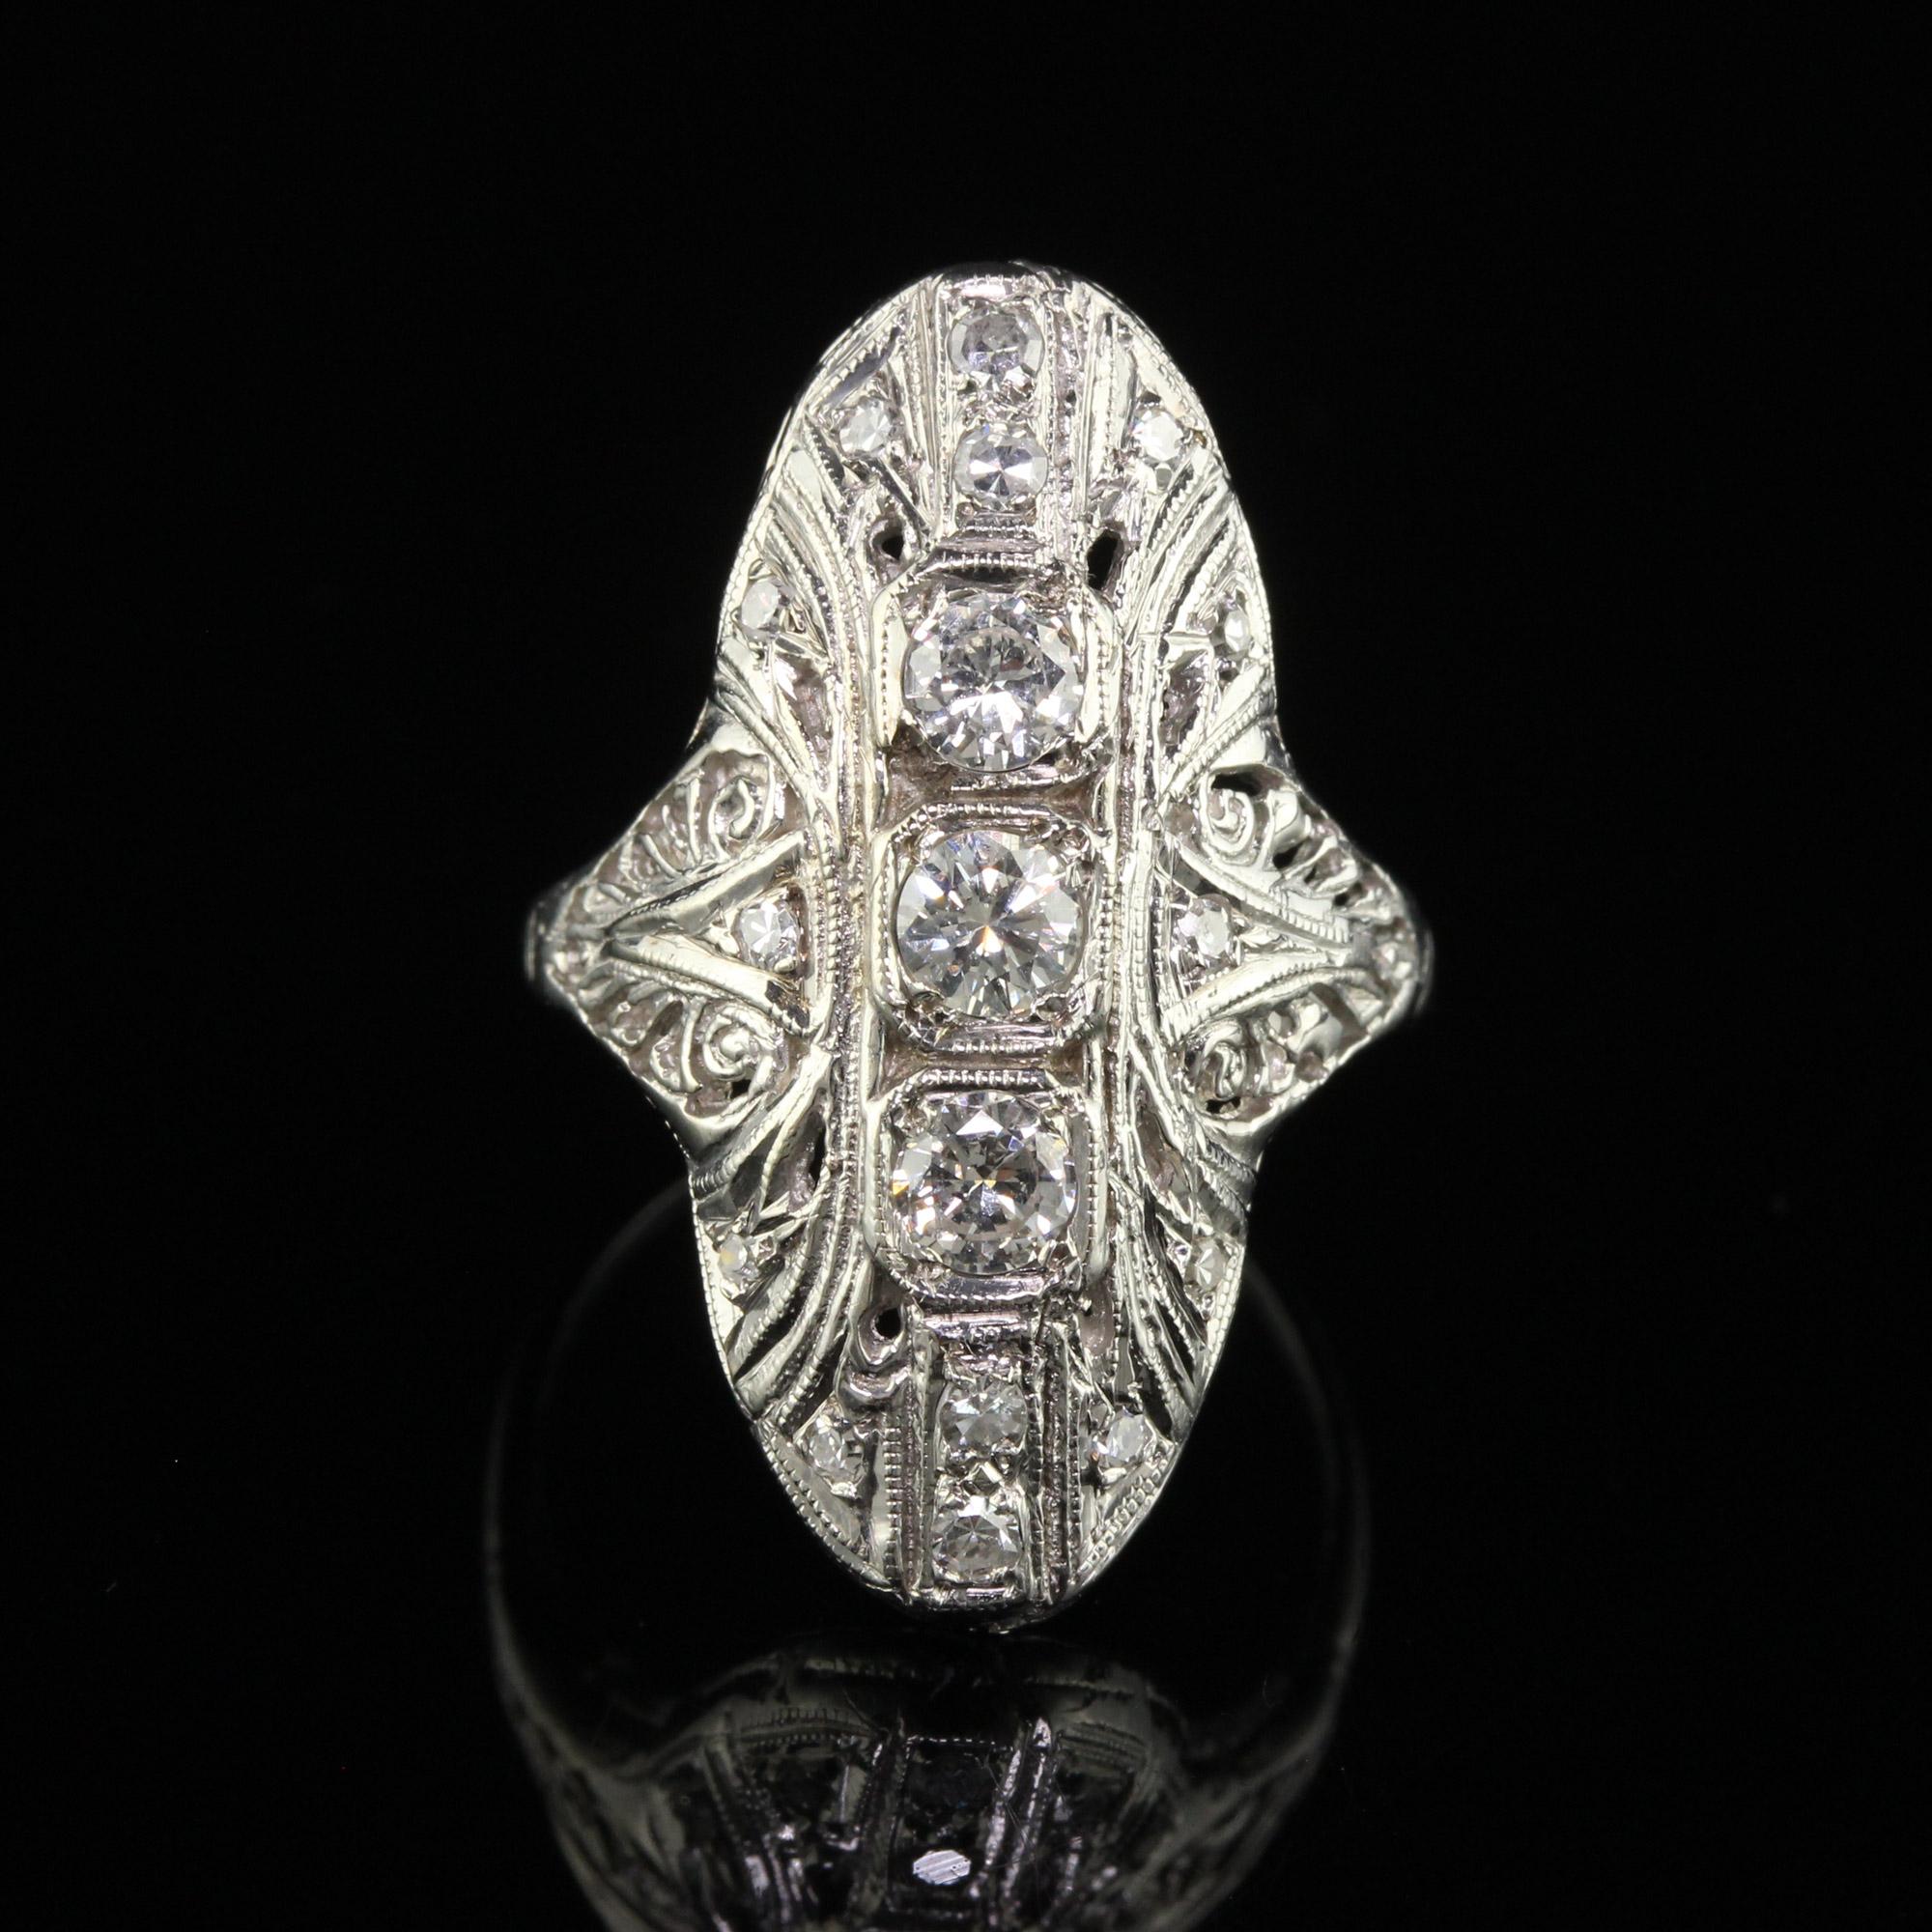 Antique Art Deco 14K White Gold Old Cut Diamond Filigree Shield Ring In Good Condition For Sale In Great Neck, NY